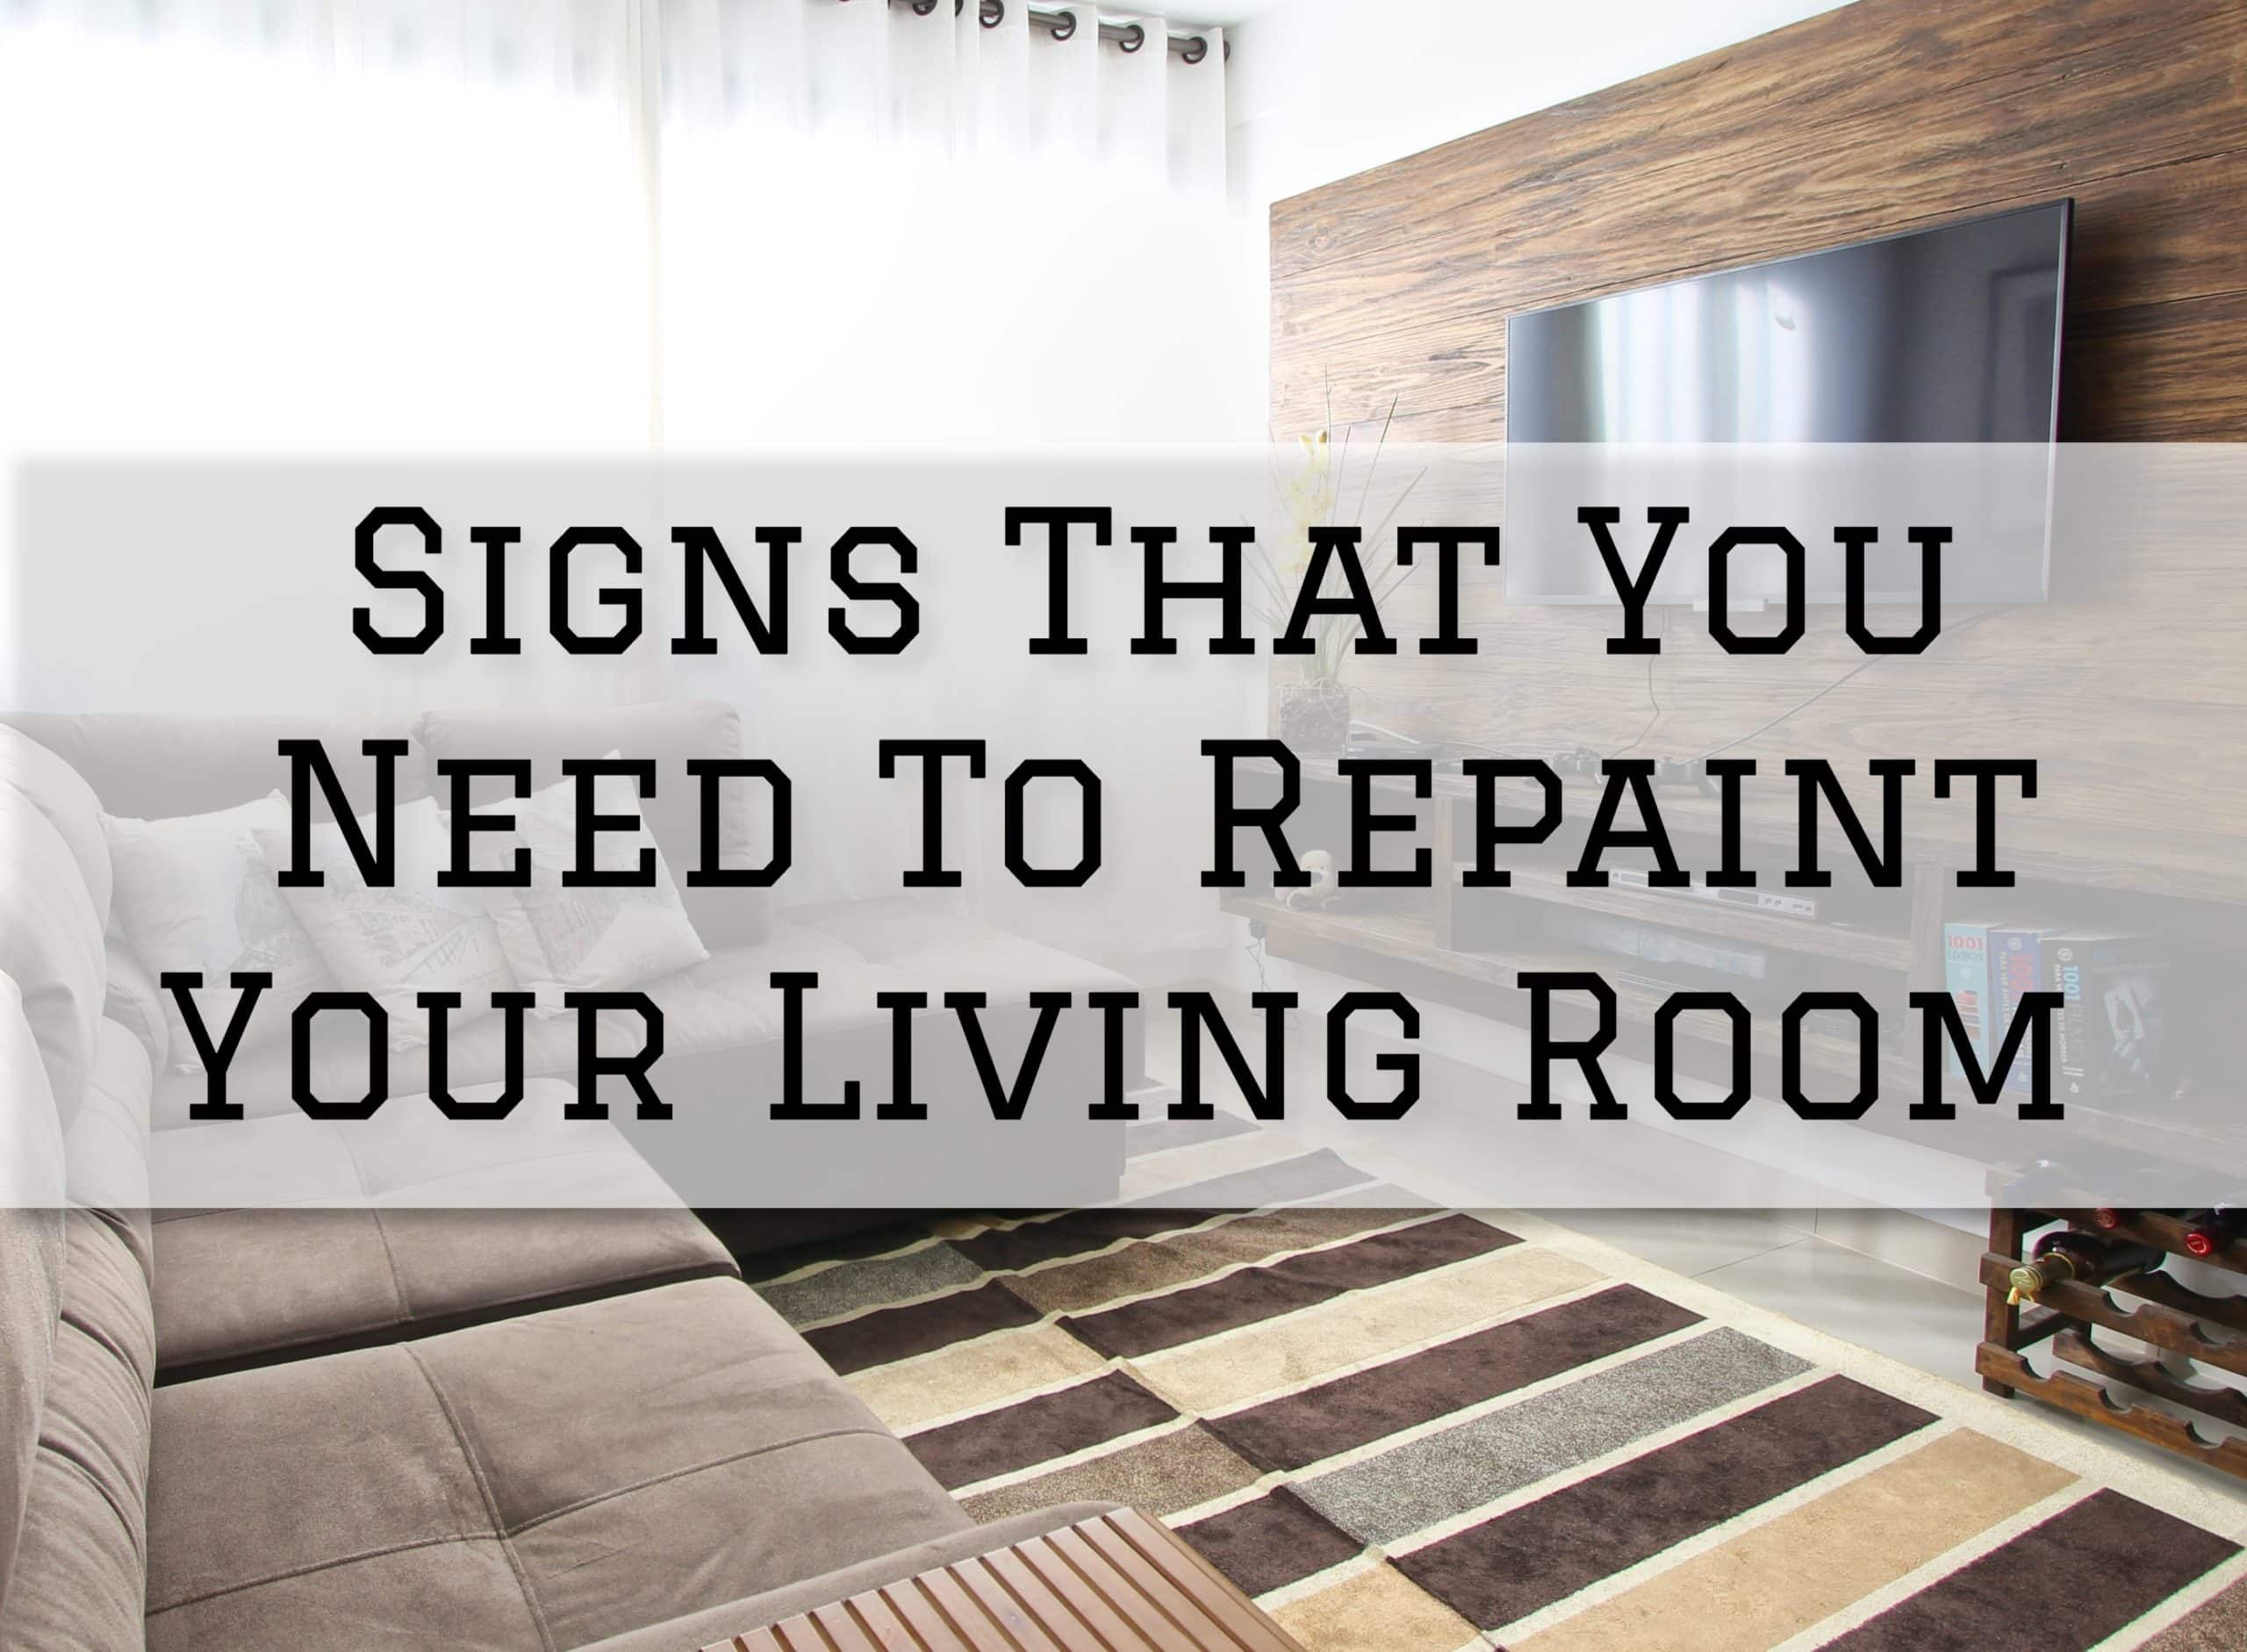 2023-04-15 Painting and Wallpapering Burlington Ontario Signs That You Need To Repaint Your Living Room